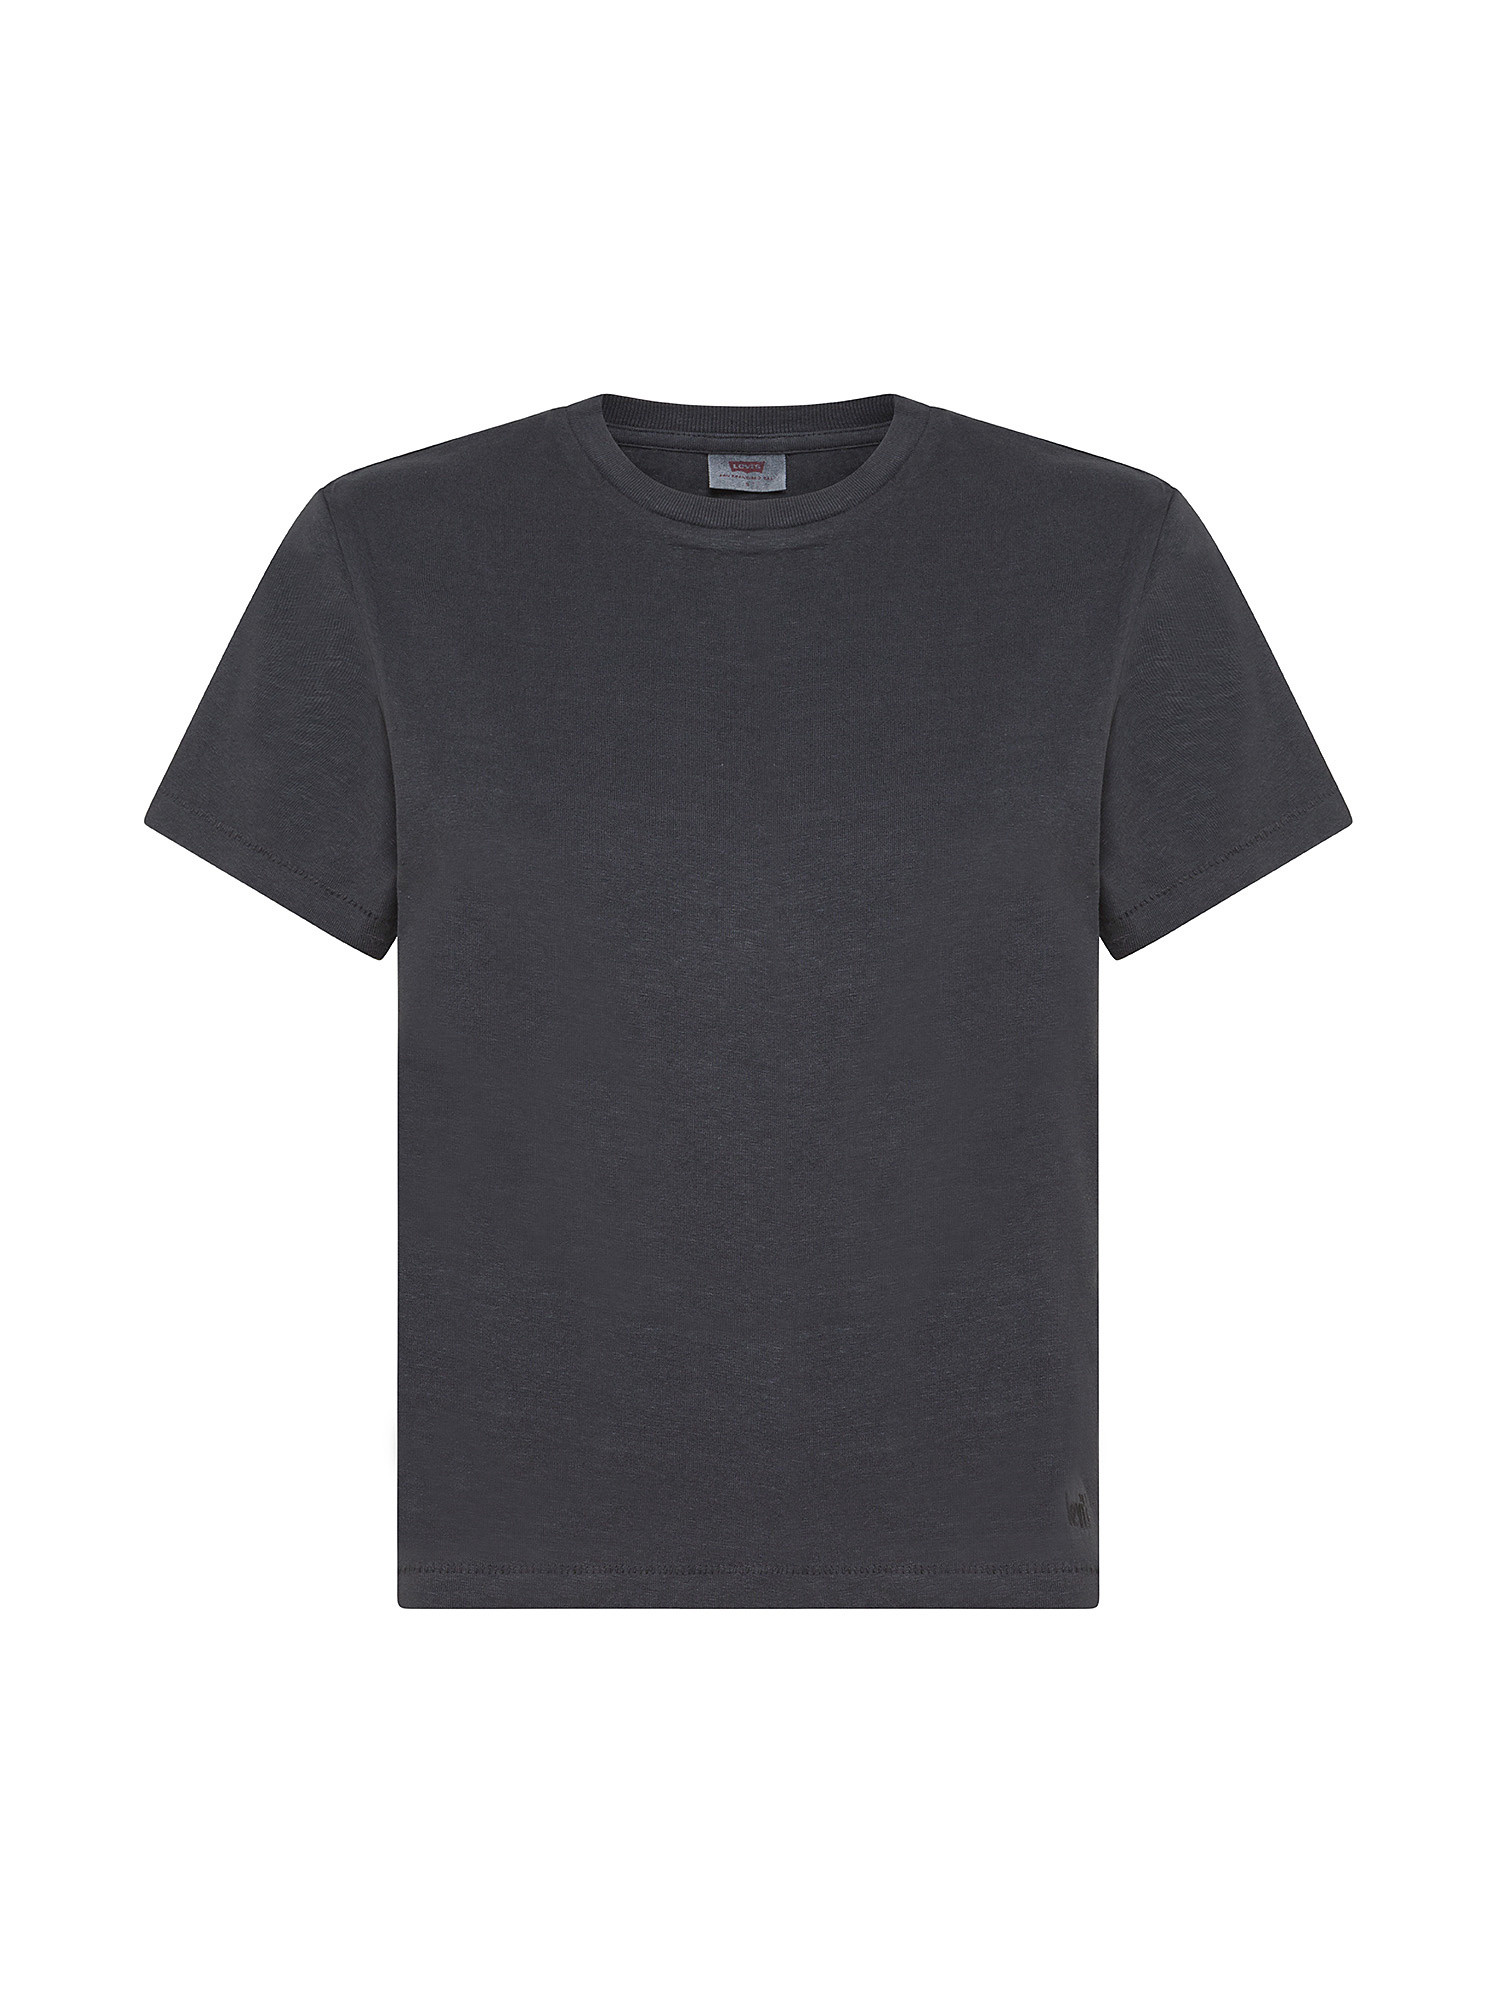 Levi's - T-shirt classic fit, Nero, large image number 0